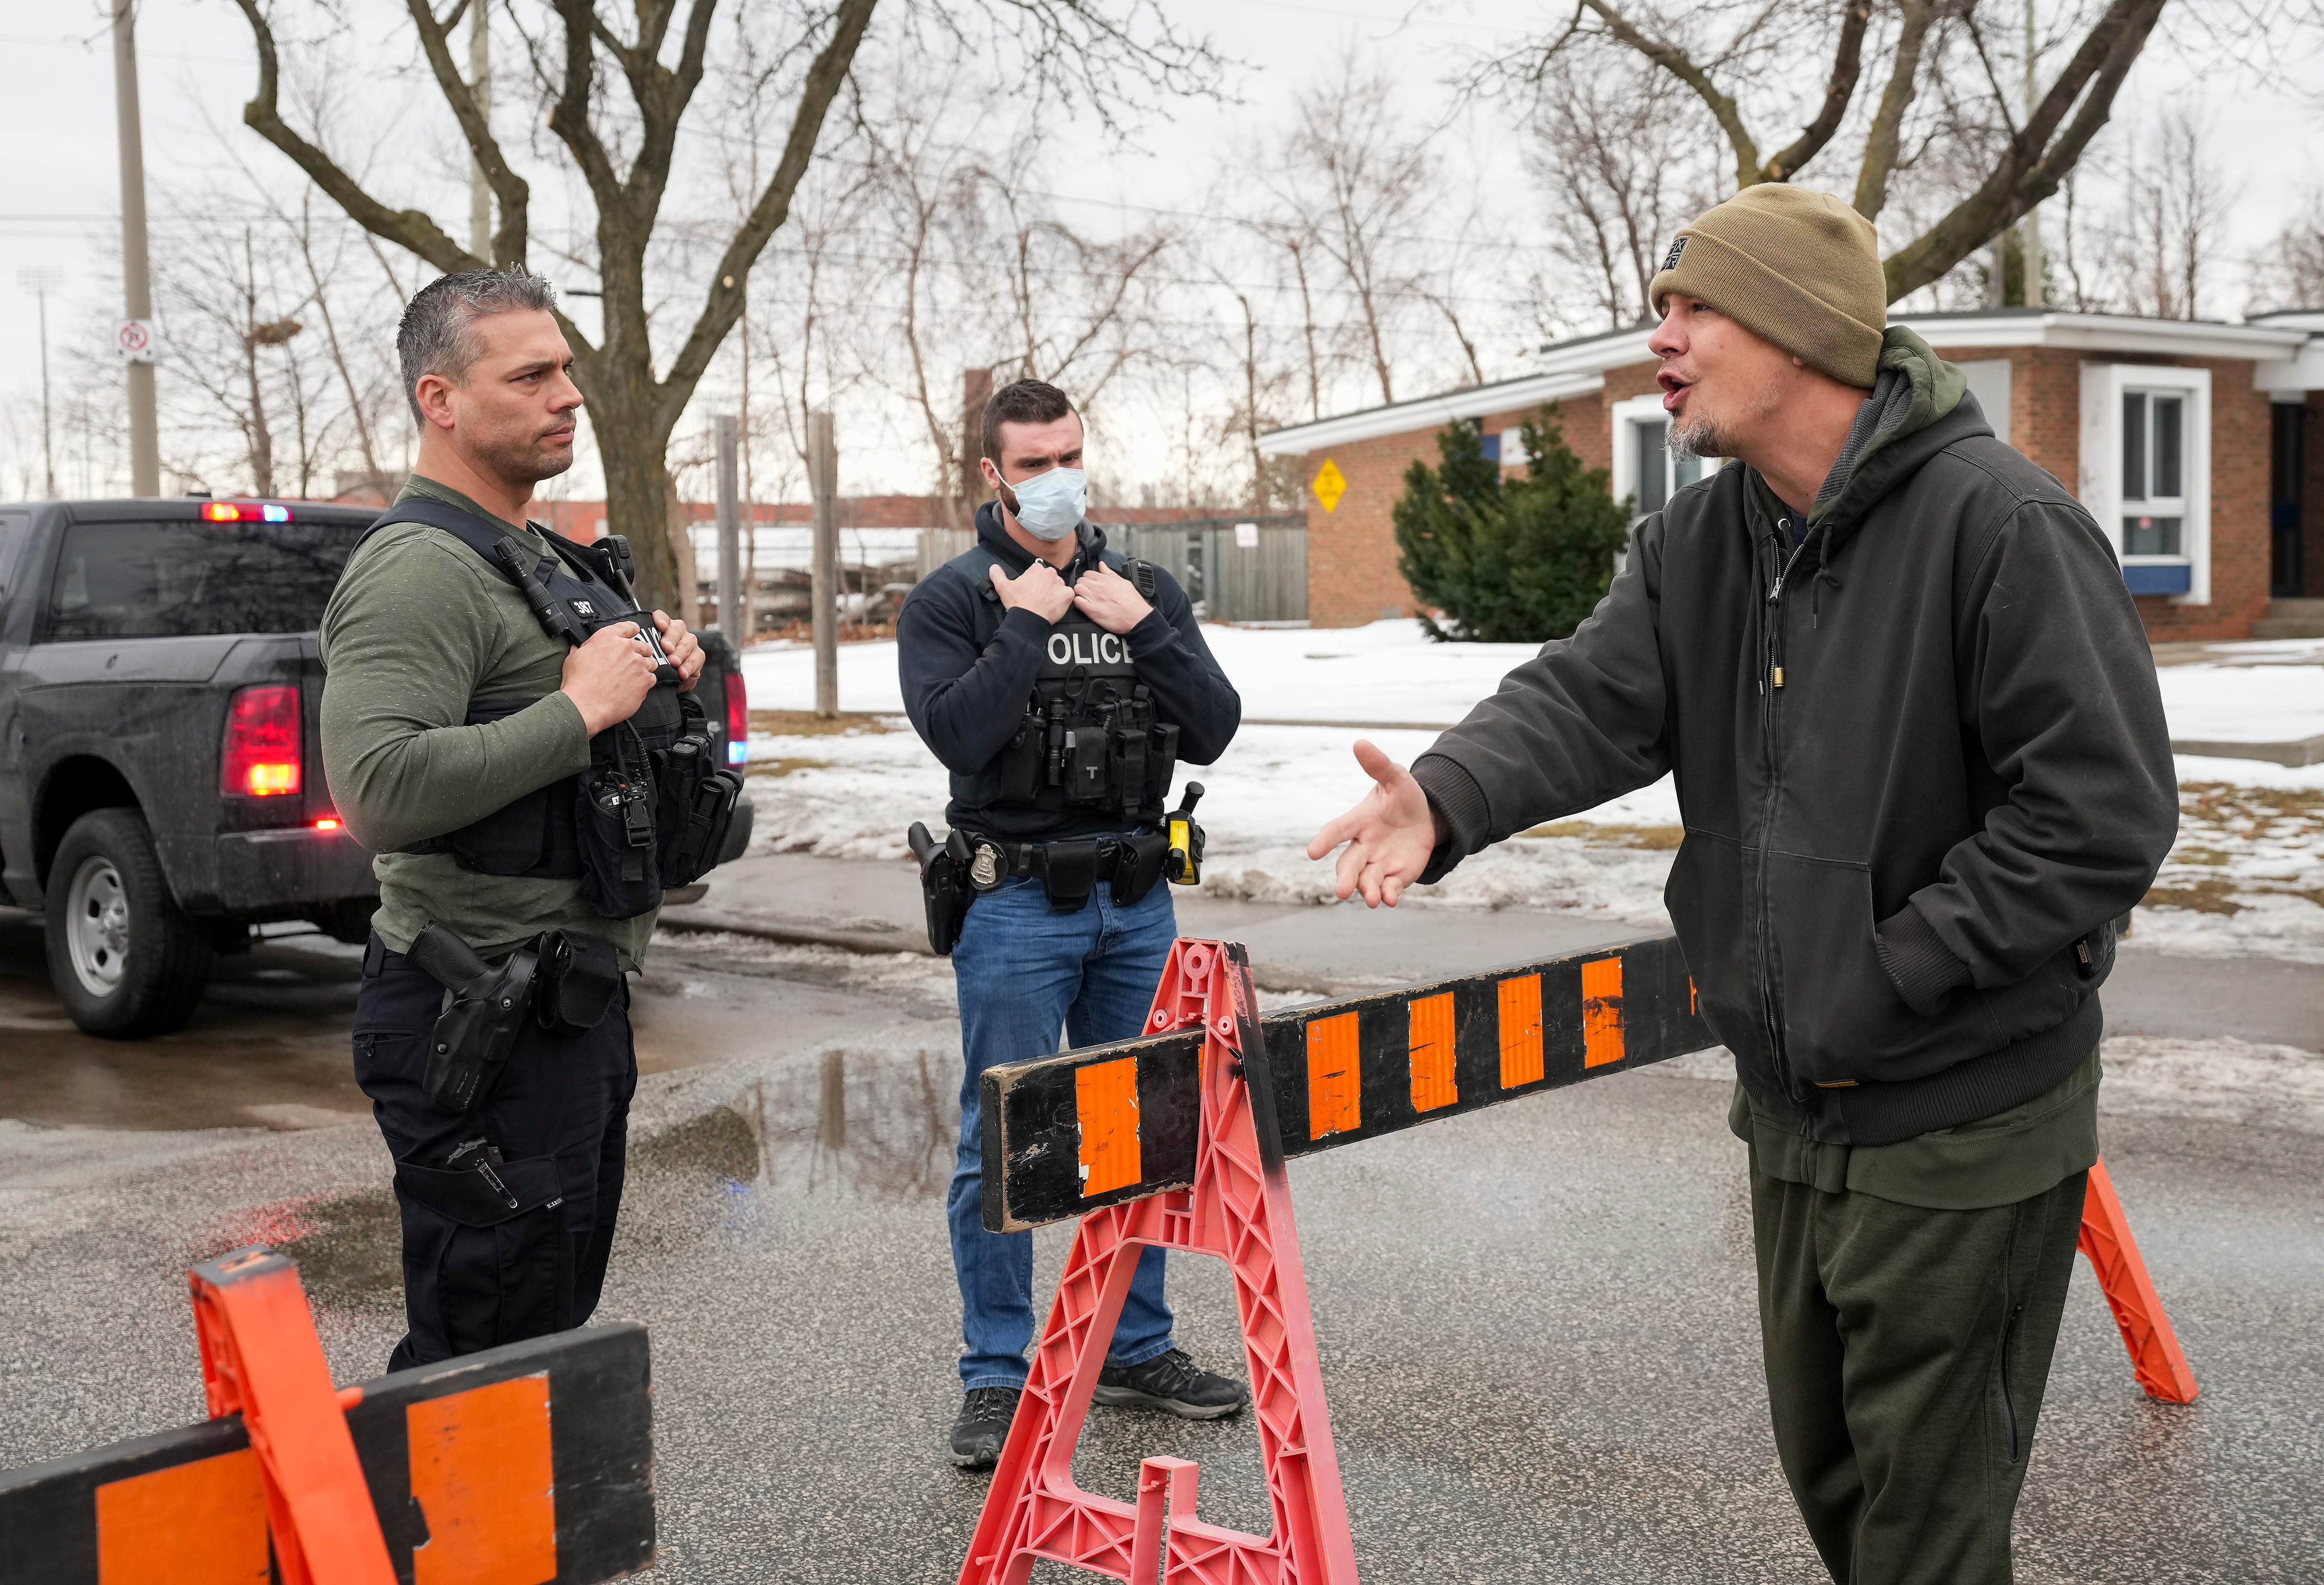 A trucker supporter, right, argues with police for not allowing his truck through as truckers and supporters block the access leading from the Ambassador Bridge, linking Detroit and Windsor, during a protest against COVID-19 vaccine mandates and restrictions, in Windsor, Ont., Thursday, Feb. 10, 2022.